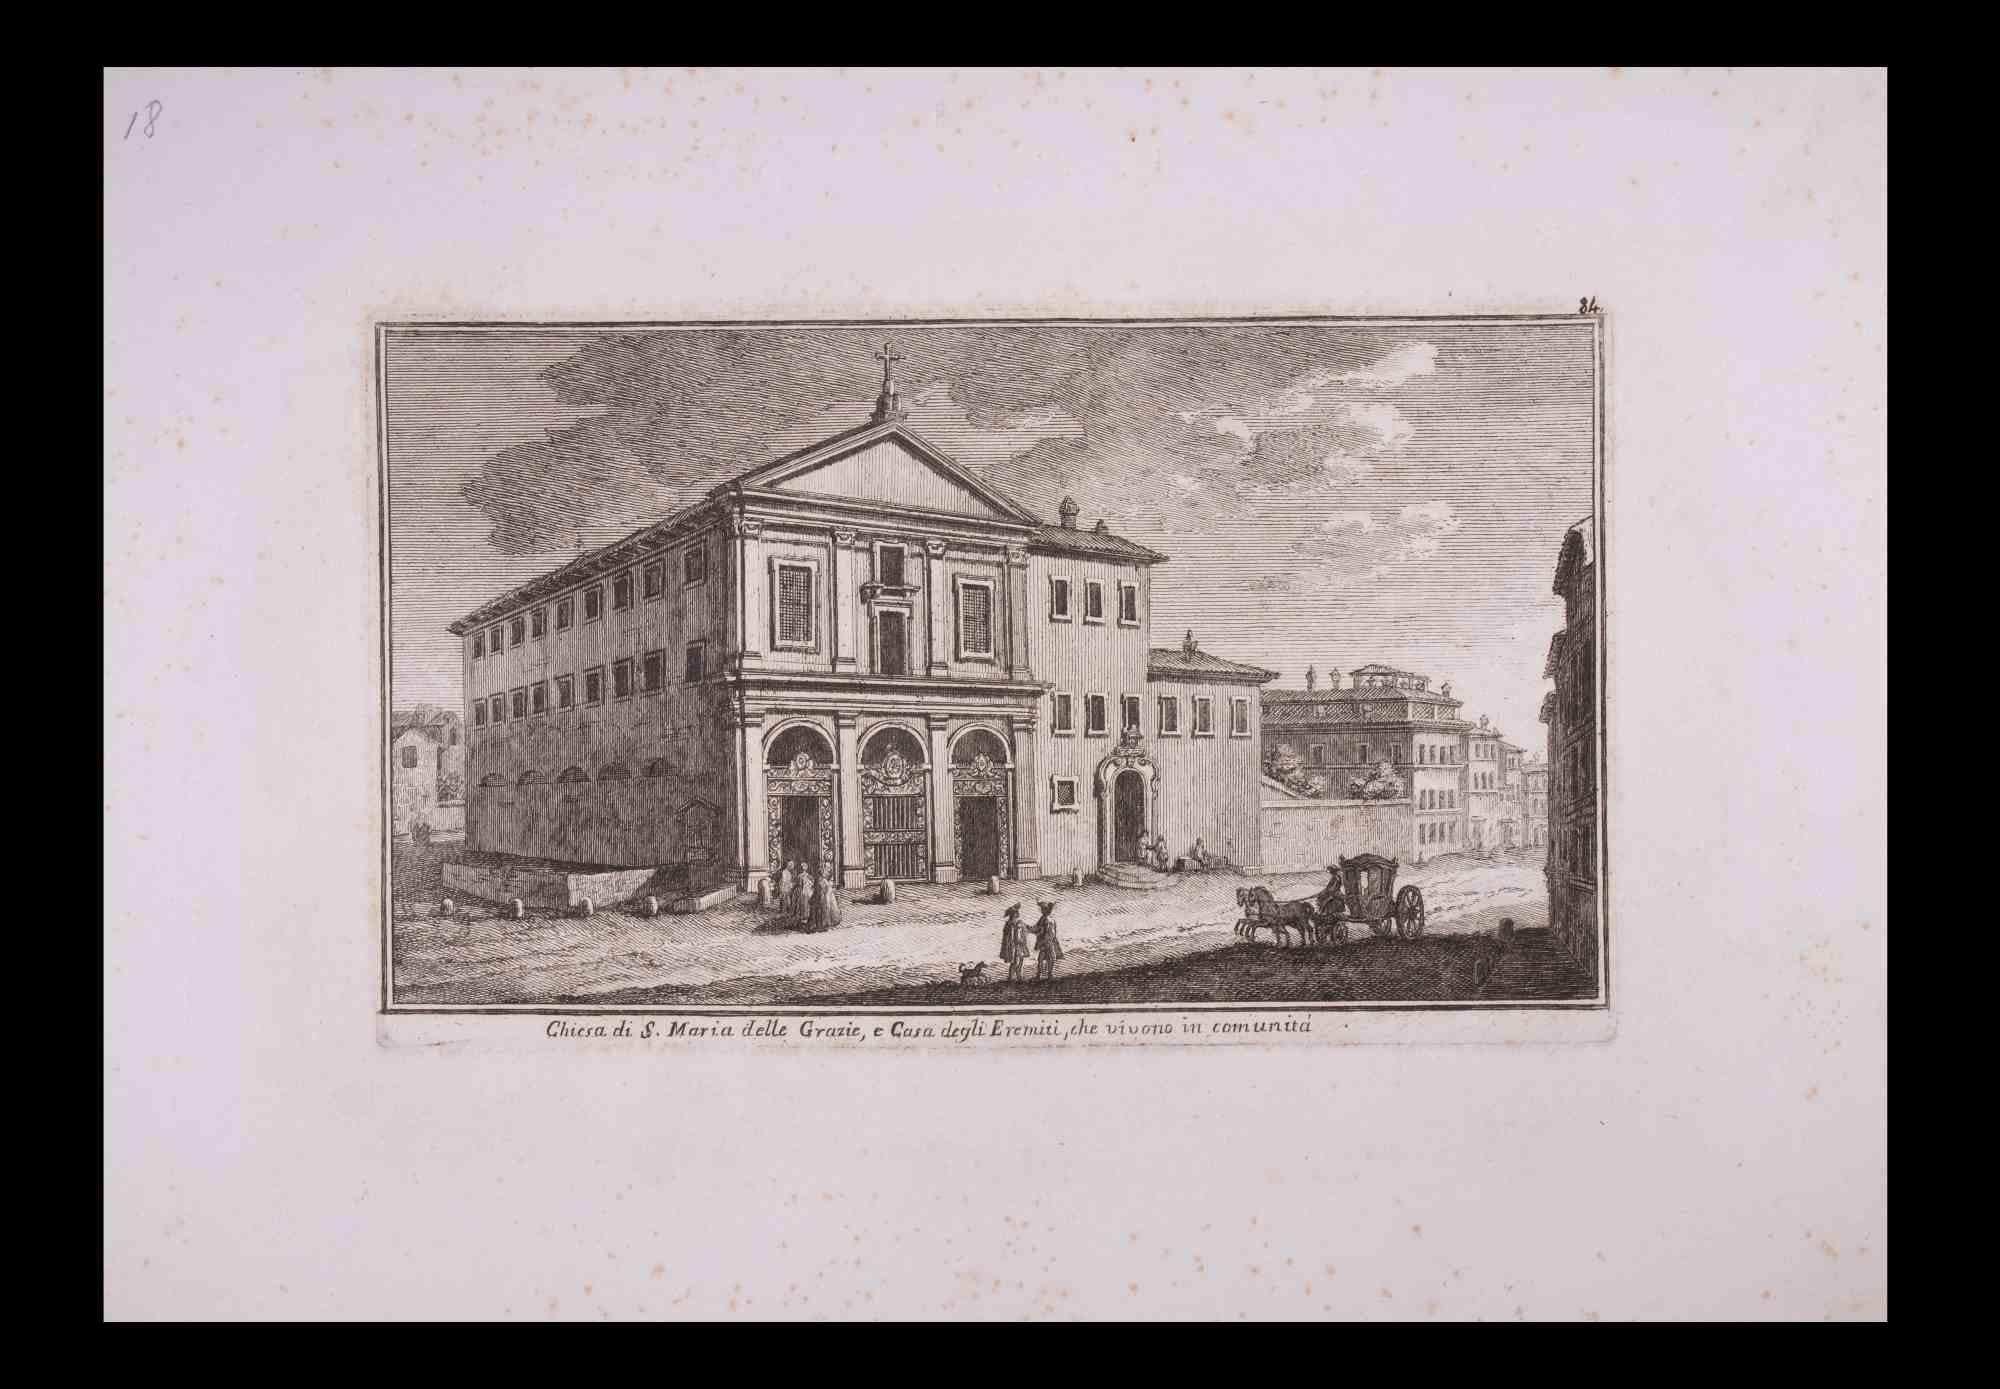 Chiesa di S. Maria delle Grazie is an original black and white etching of the Late 18th century realized by Giuseppe Vasi.

Signed and titled on plate lower margin. 

Good conditions and aged margins with some foxing.

Giuseppe Vasi  (Corleone,1710